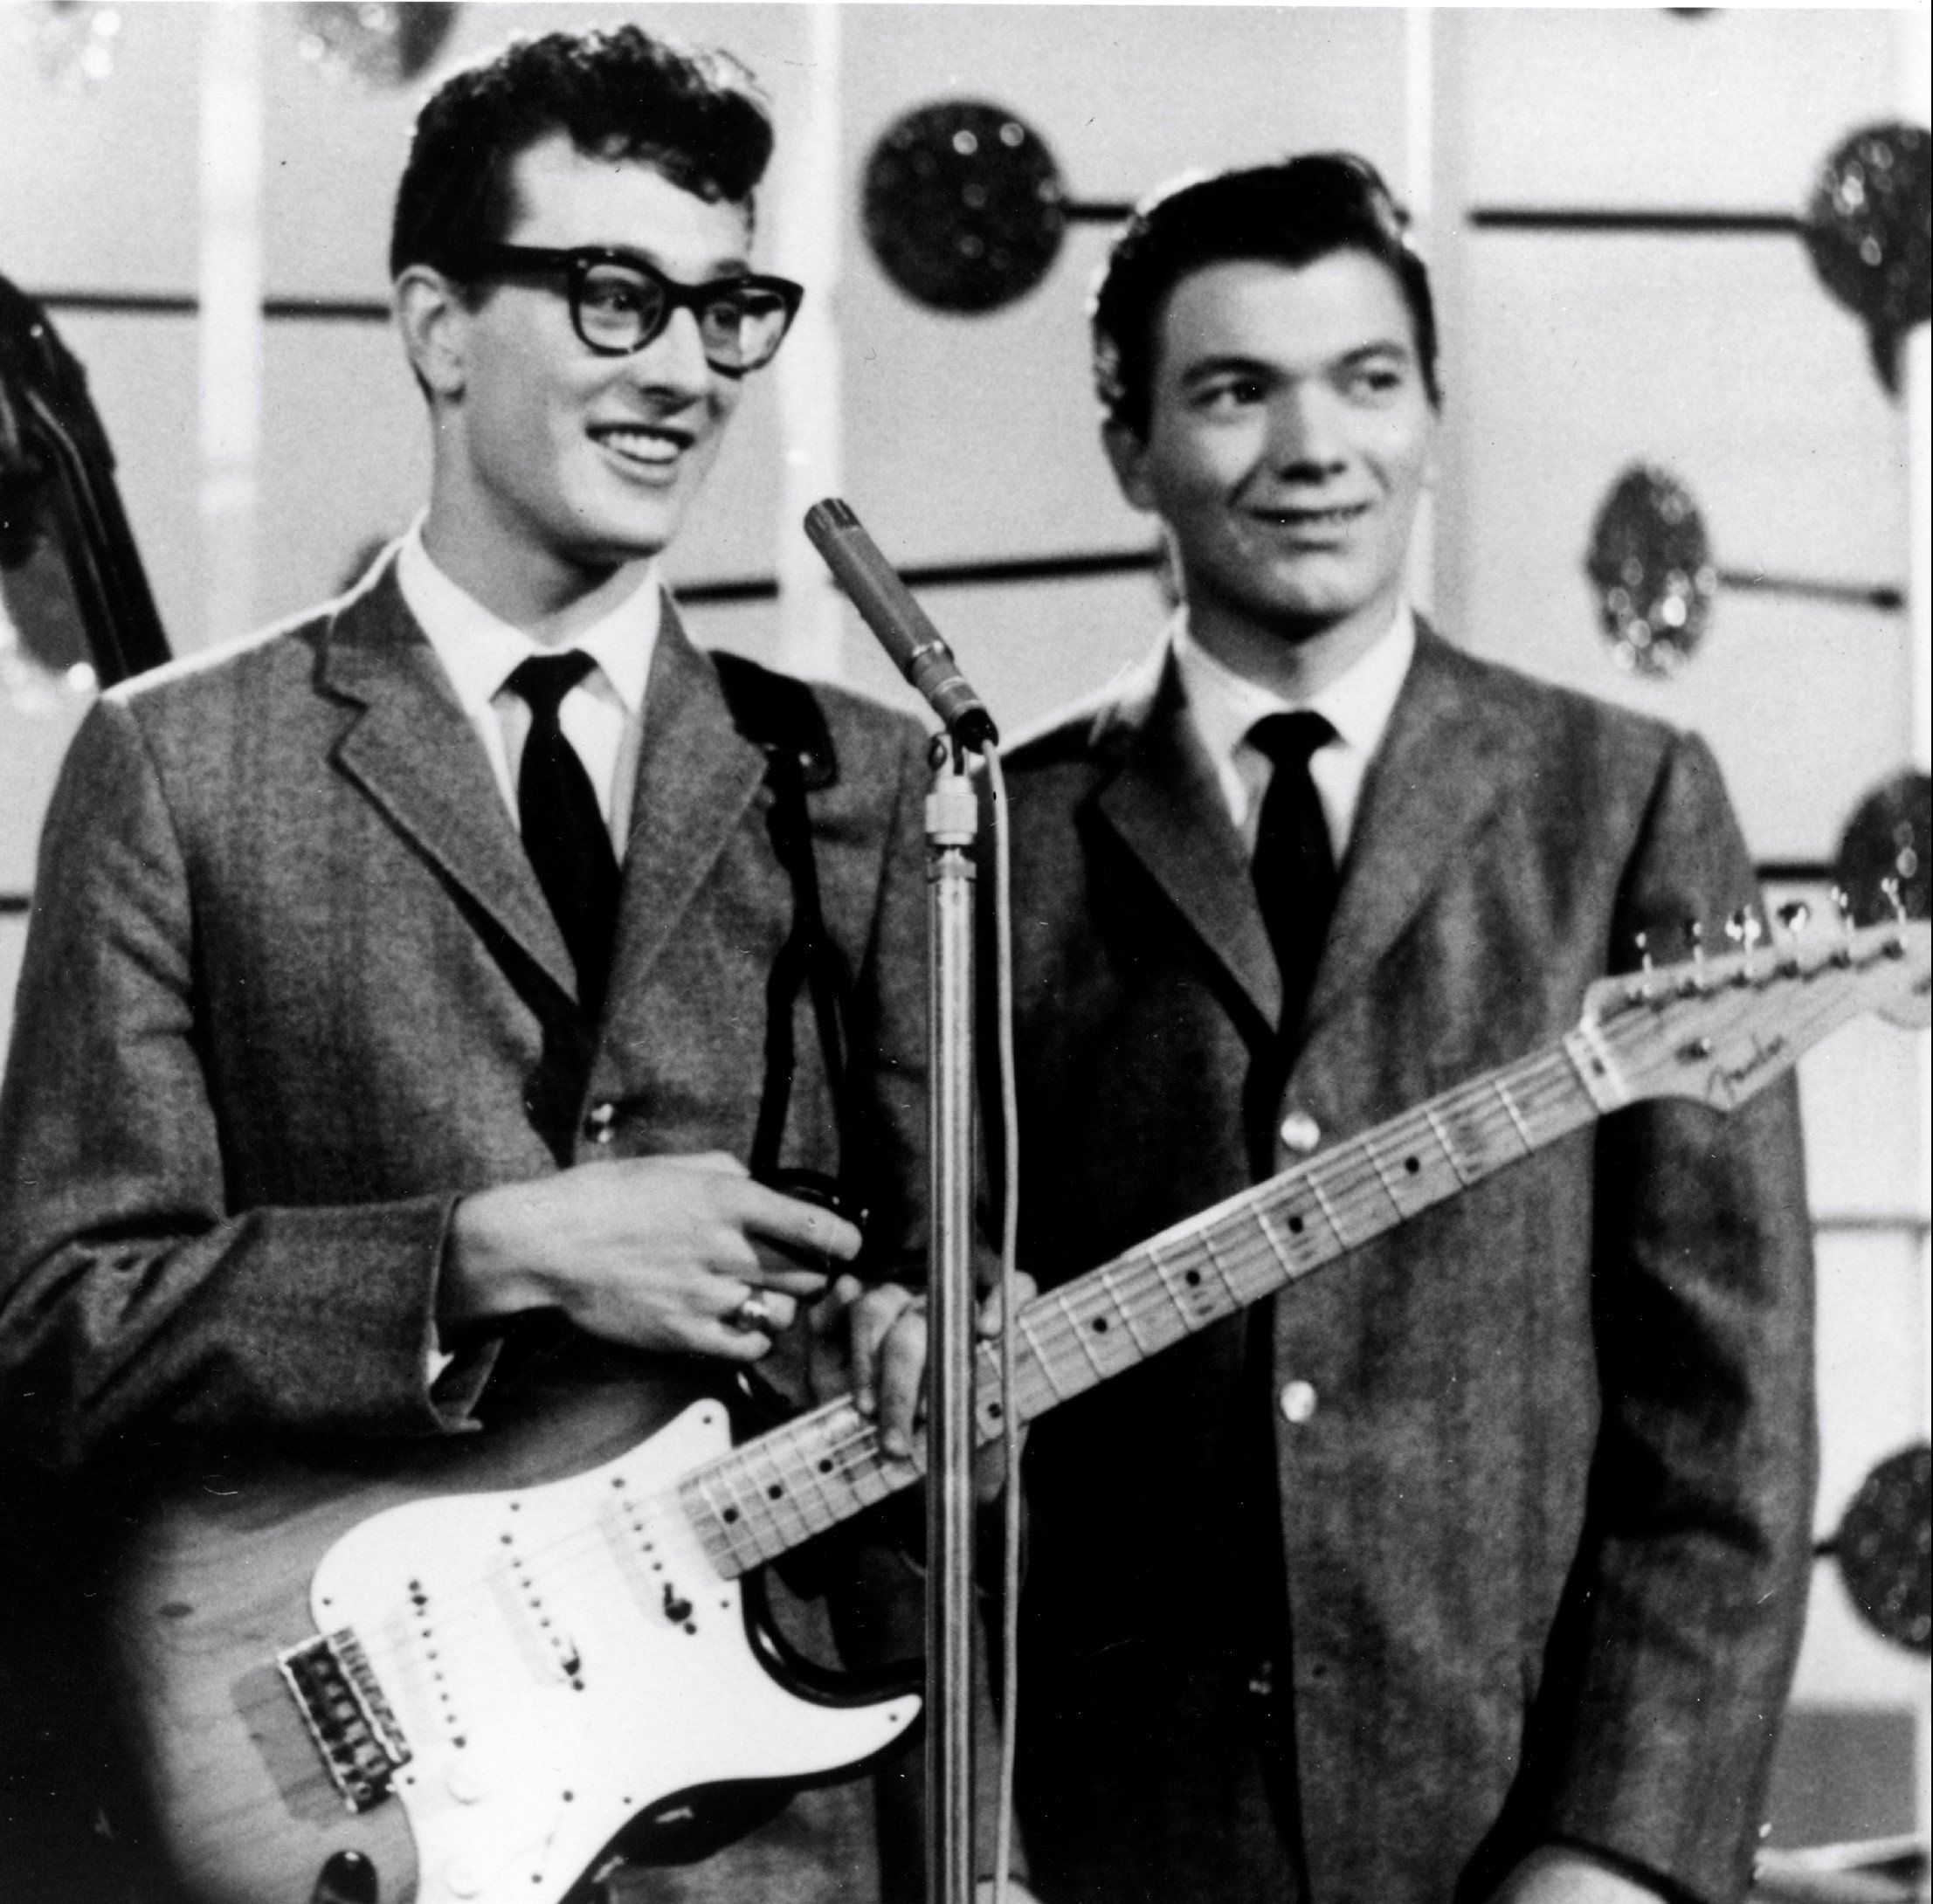 Buddy Holly with a guitar